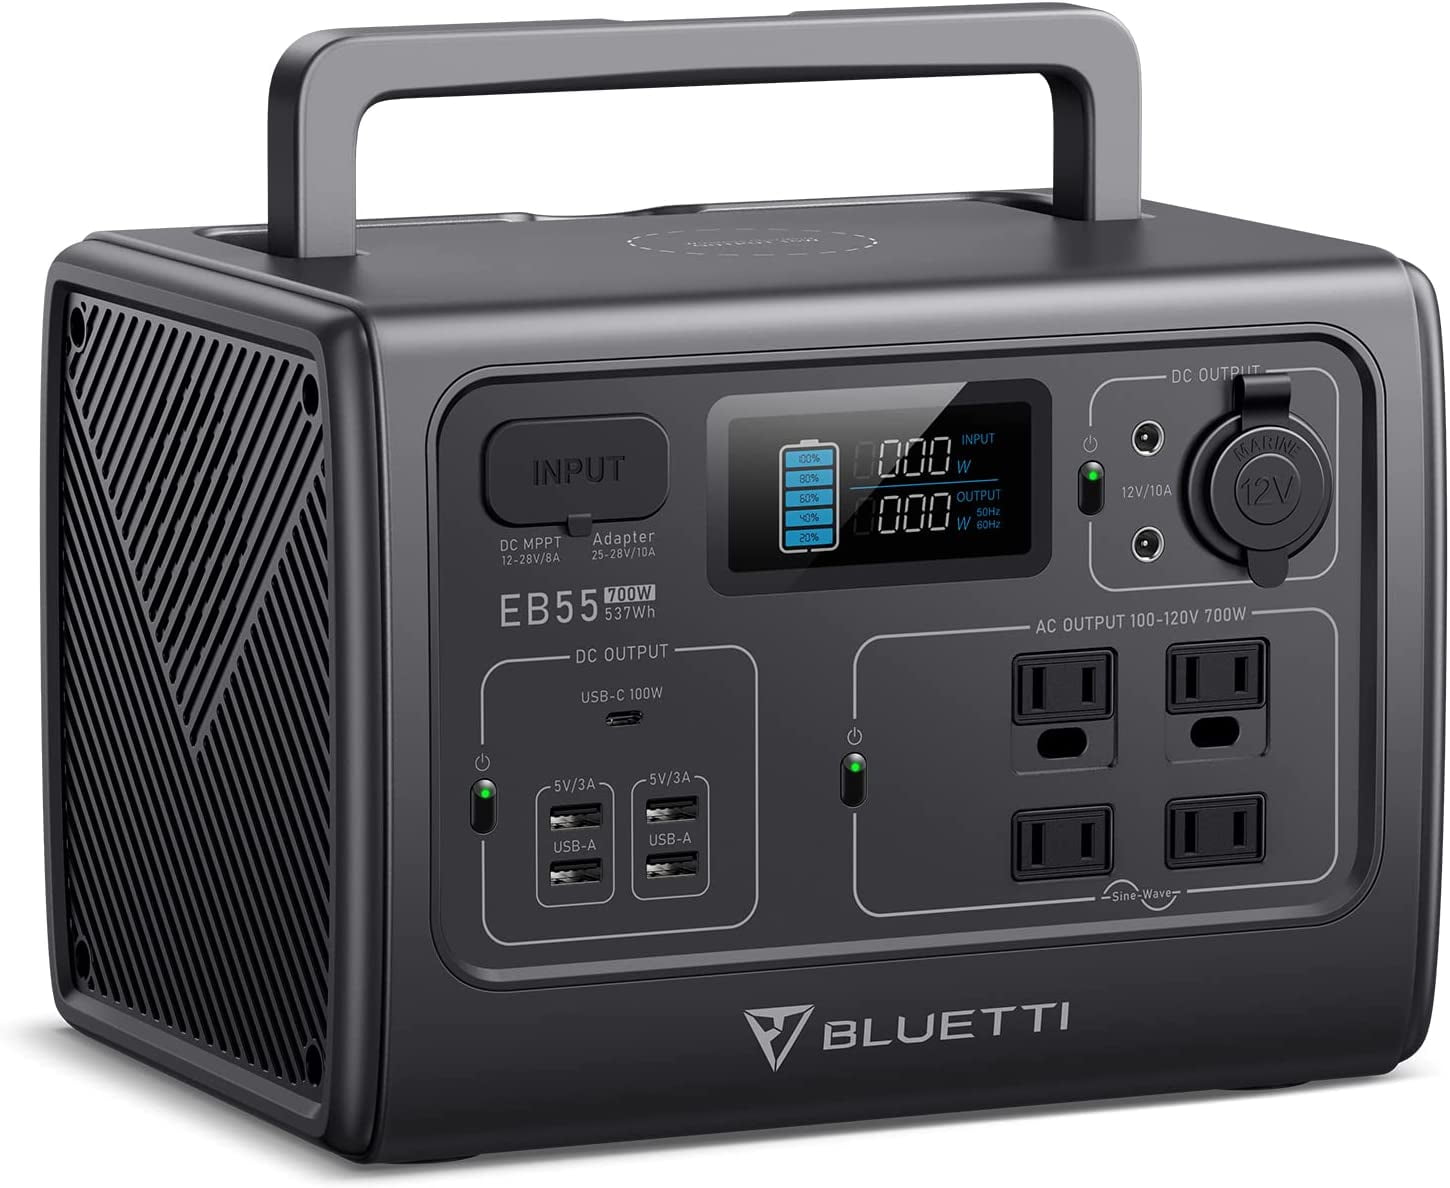 Bluetti Portable Power Station, EB55 Solar Generator, 537Wh Capacity ,700W  AC Output, for Home House Use,Emergency, Outdoor Camping 